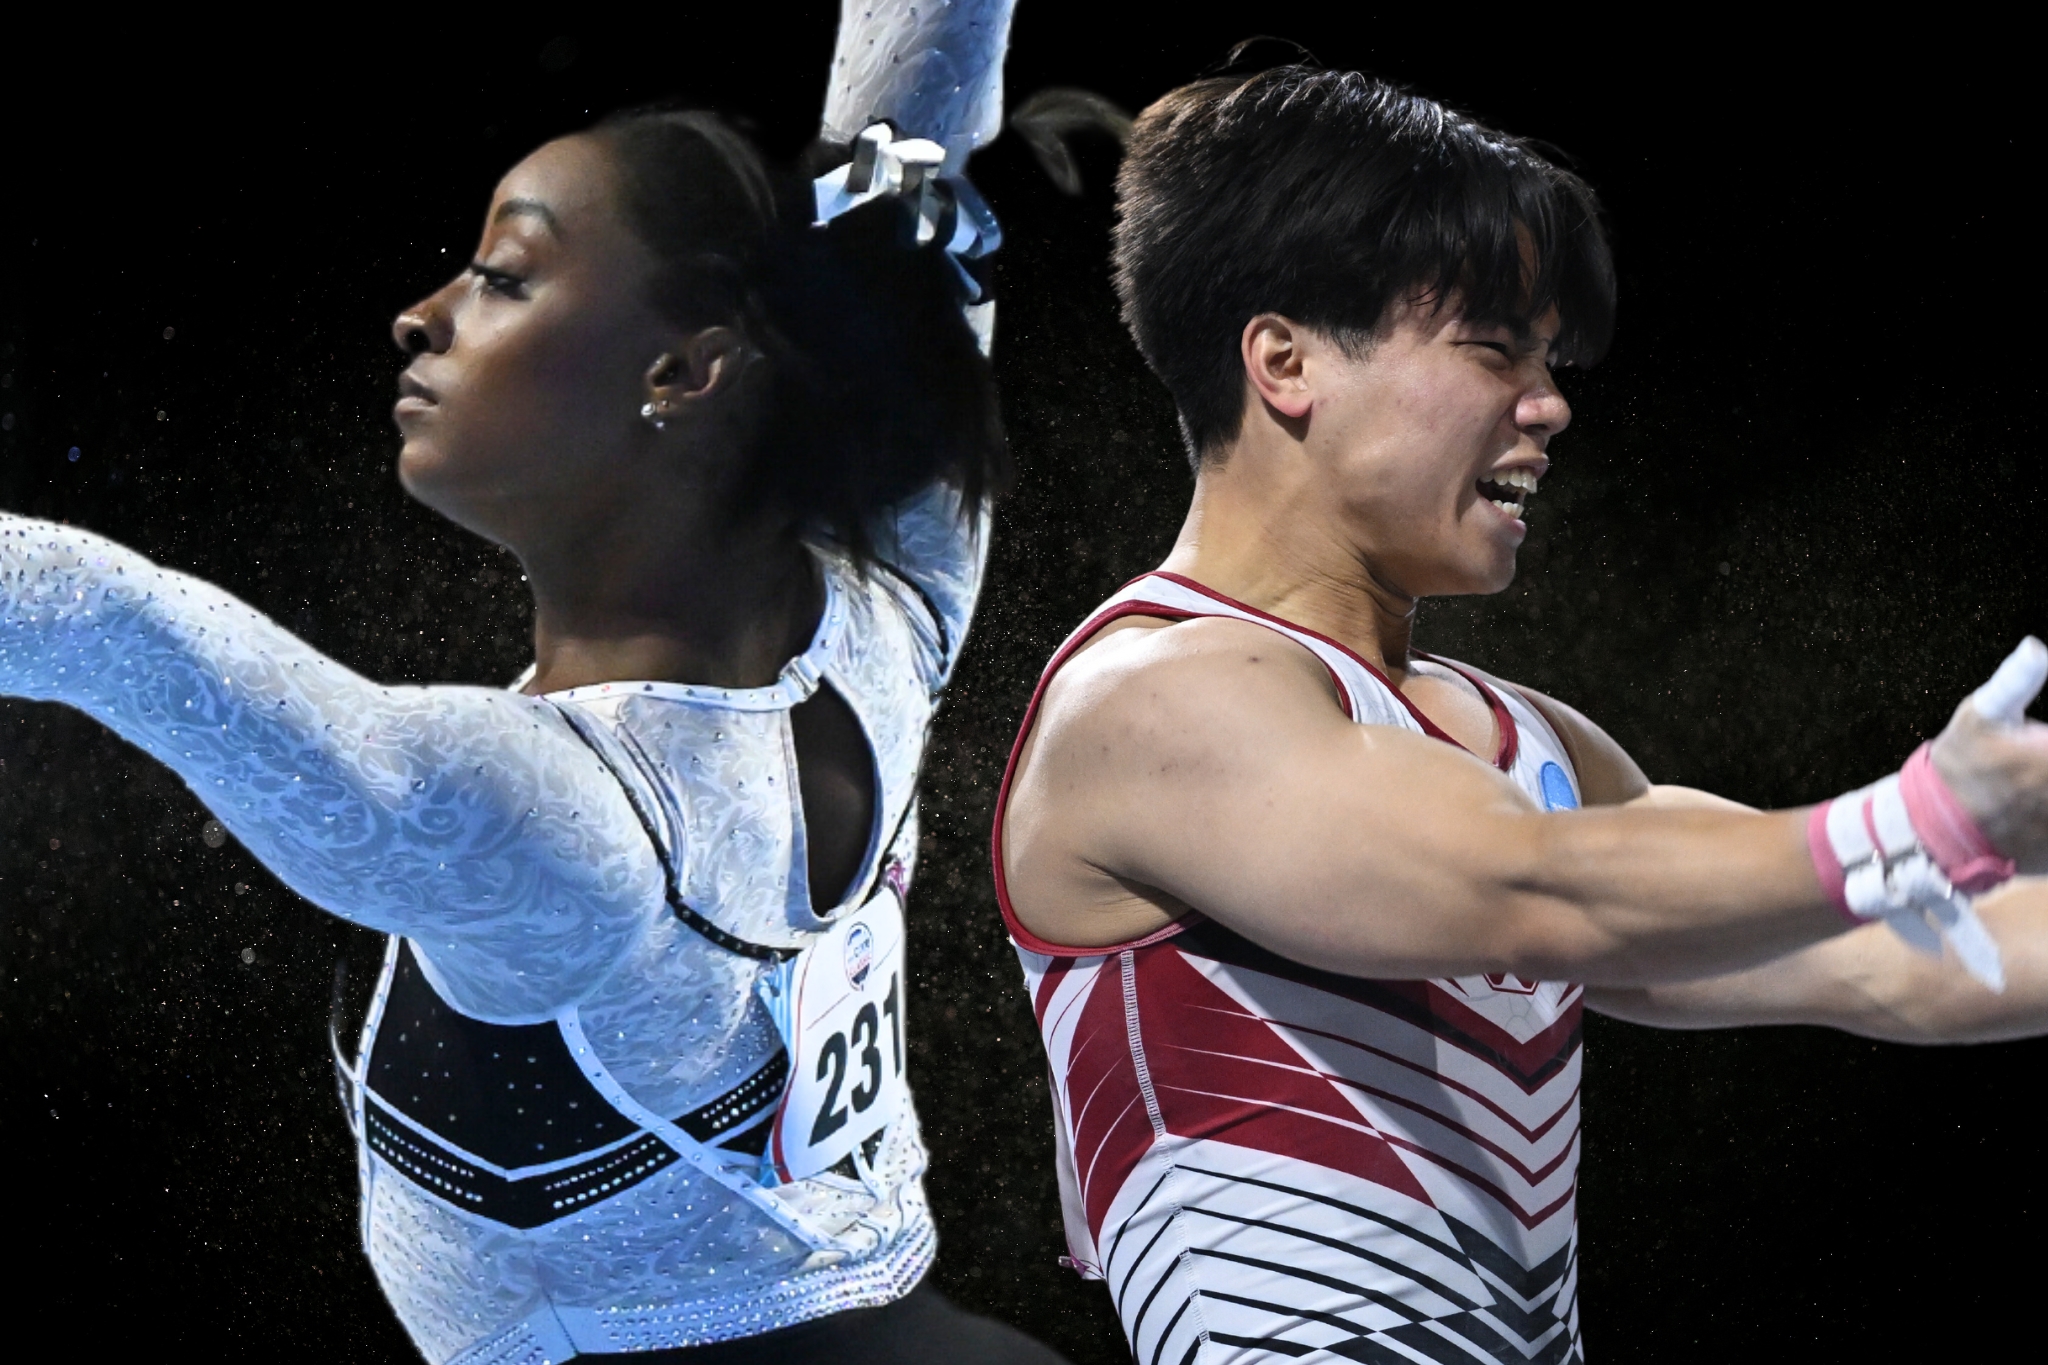 Simone Biles (left) and Asher Hong (right) headline the field for the 2023 Xfinity U.S. Gymnastics Championships after winning the senior titles at the Core Hydration Classic in early August.